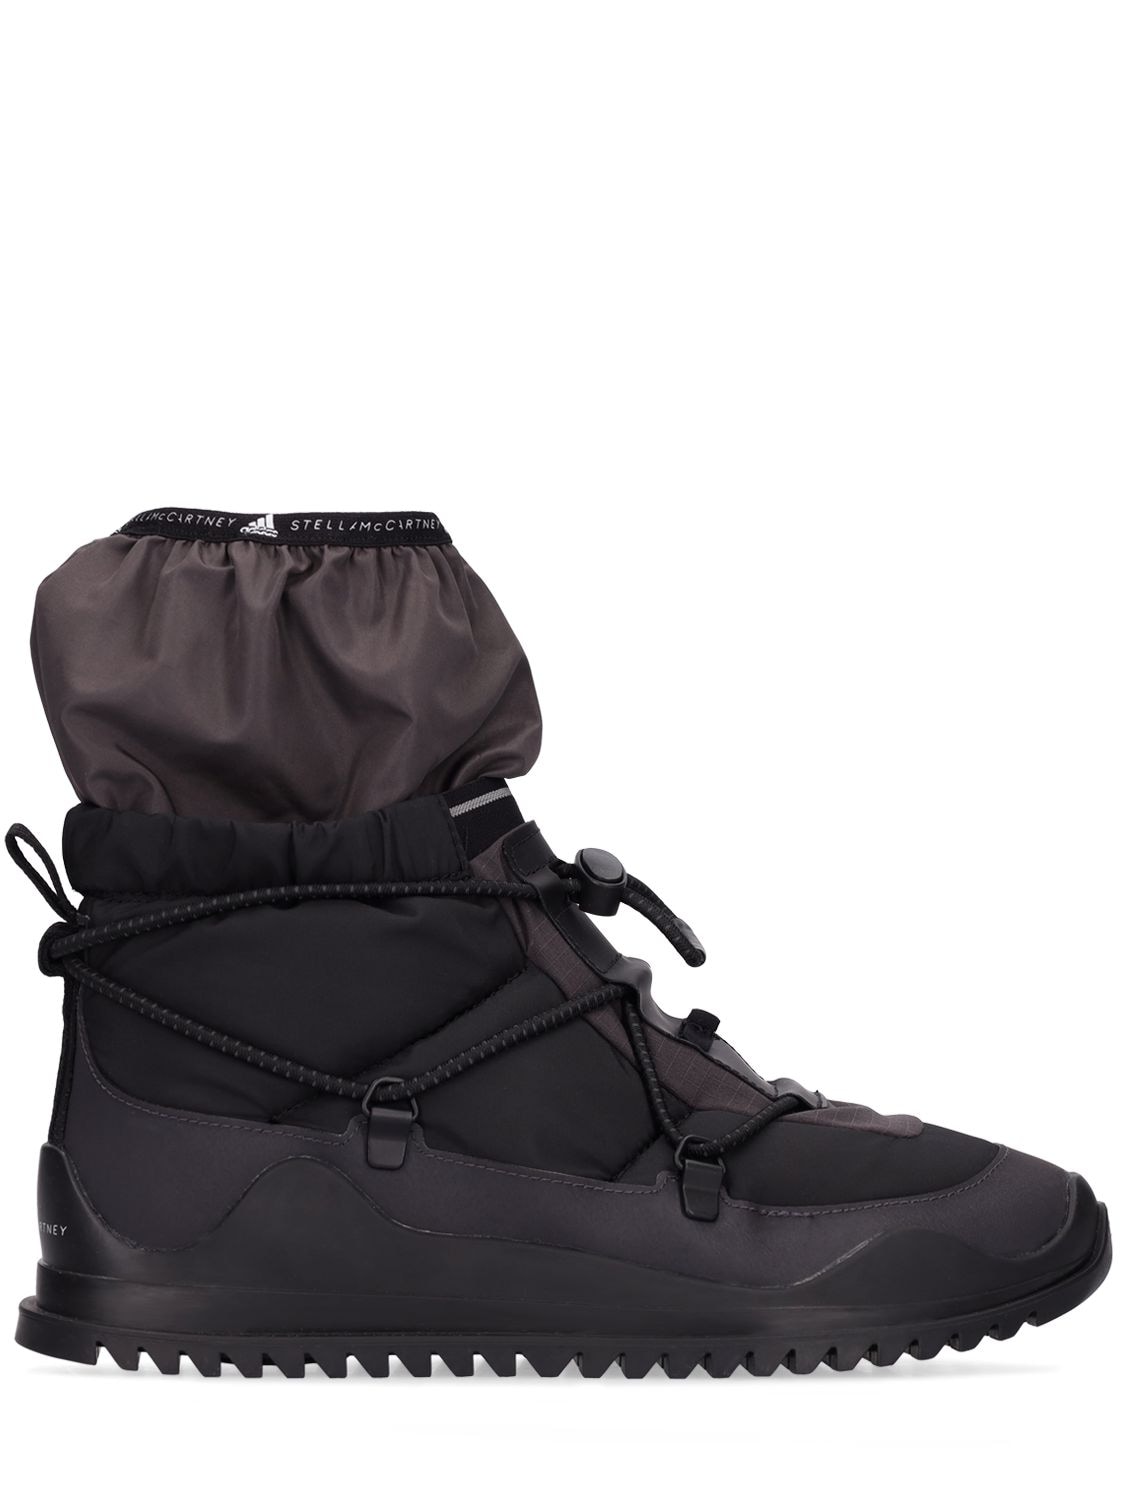 Asmc Winter Cold Ready Boots image